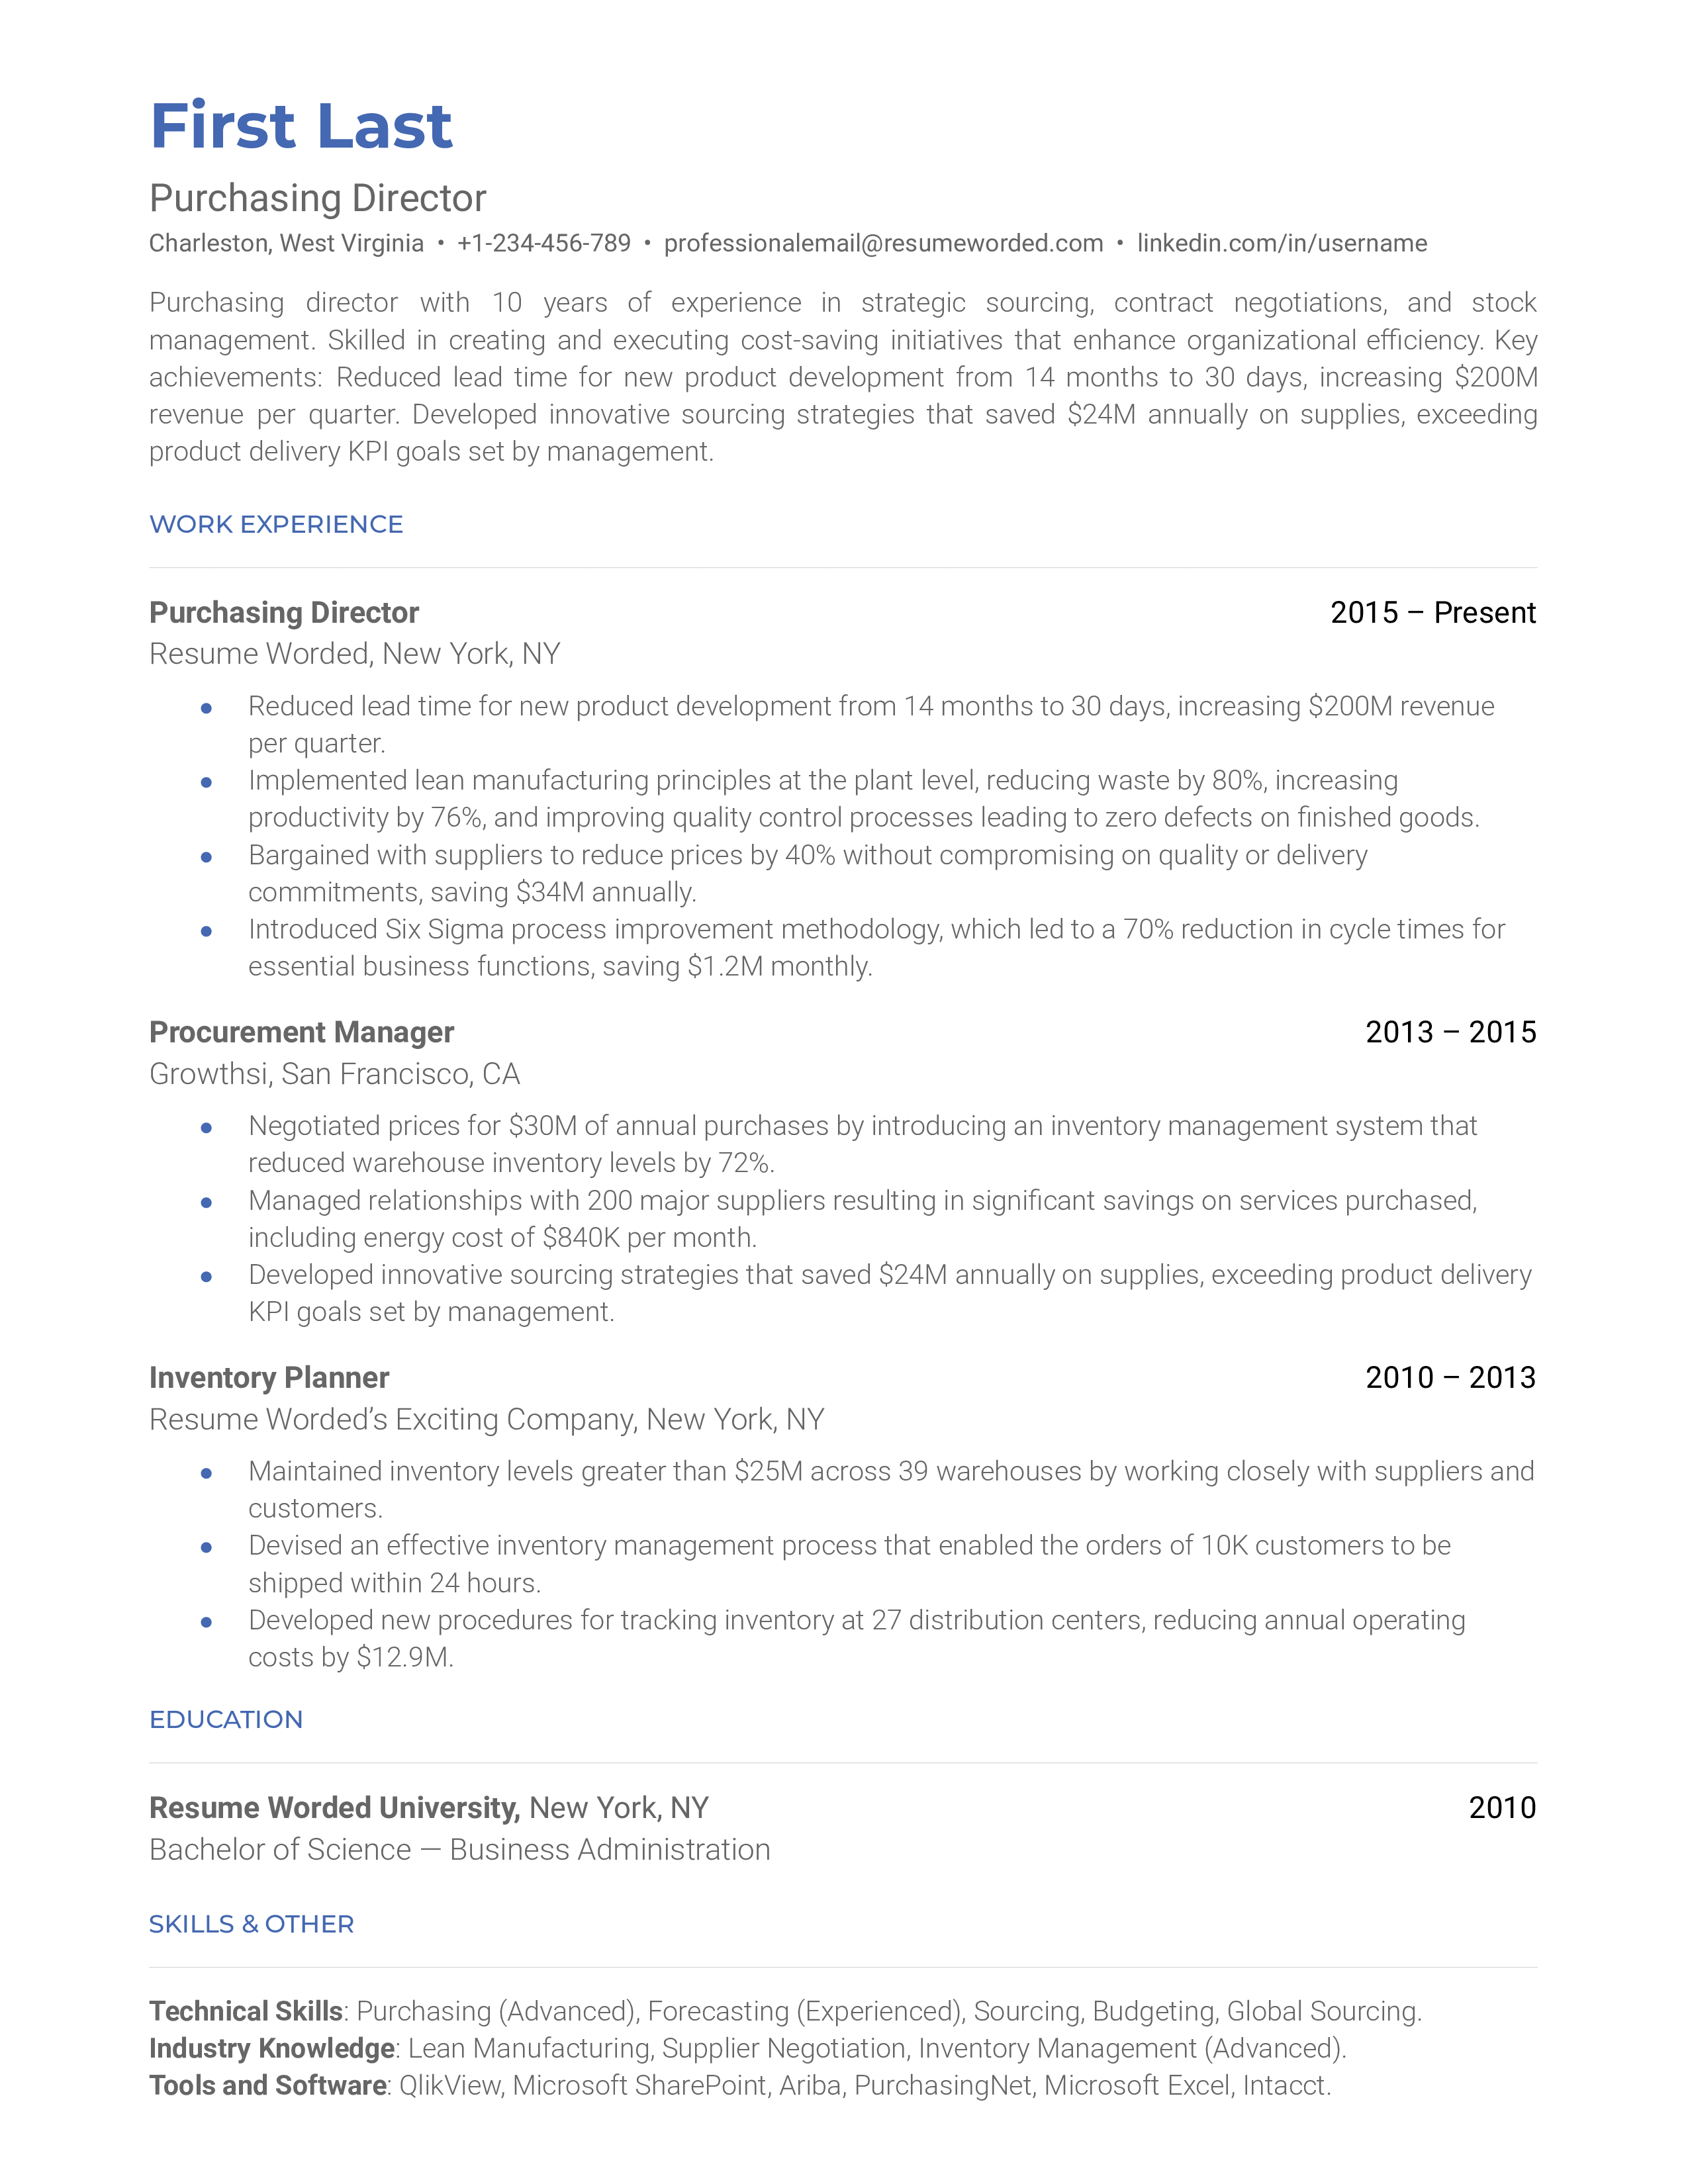 A purchasing director resume example that organizes work experience chronologically